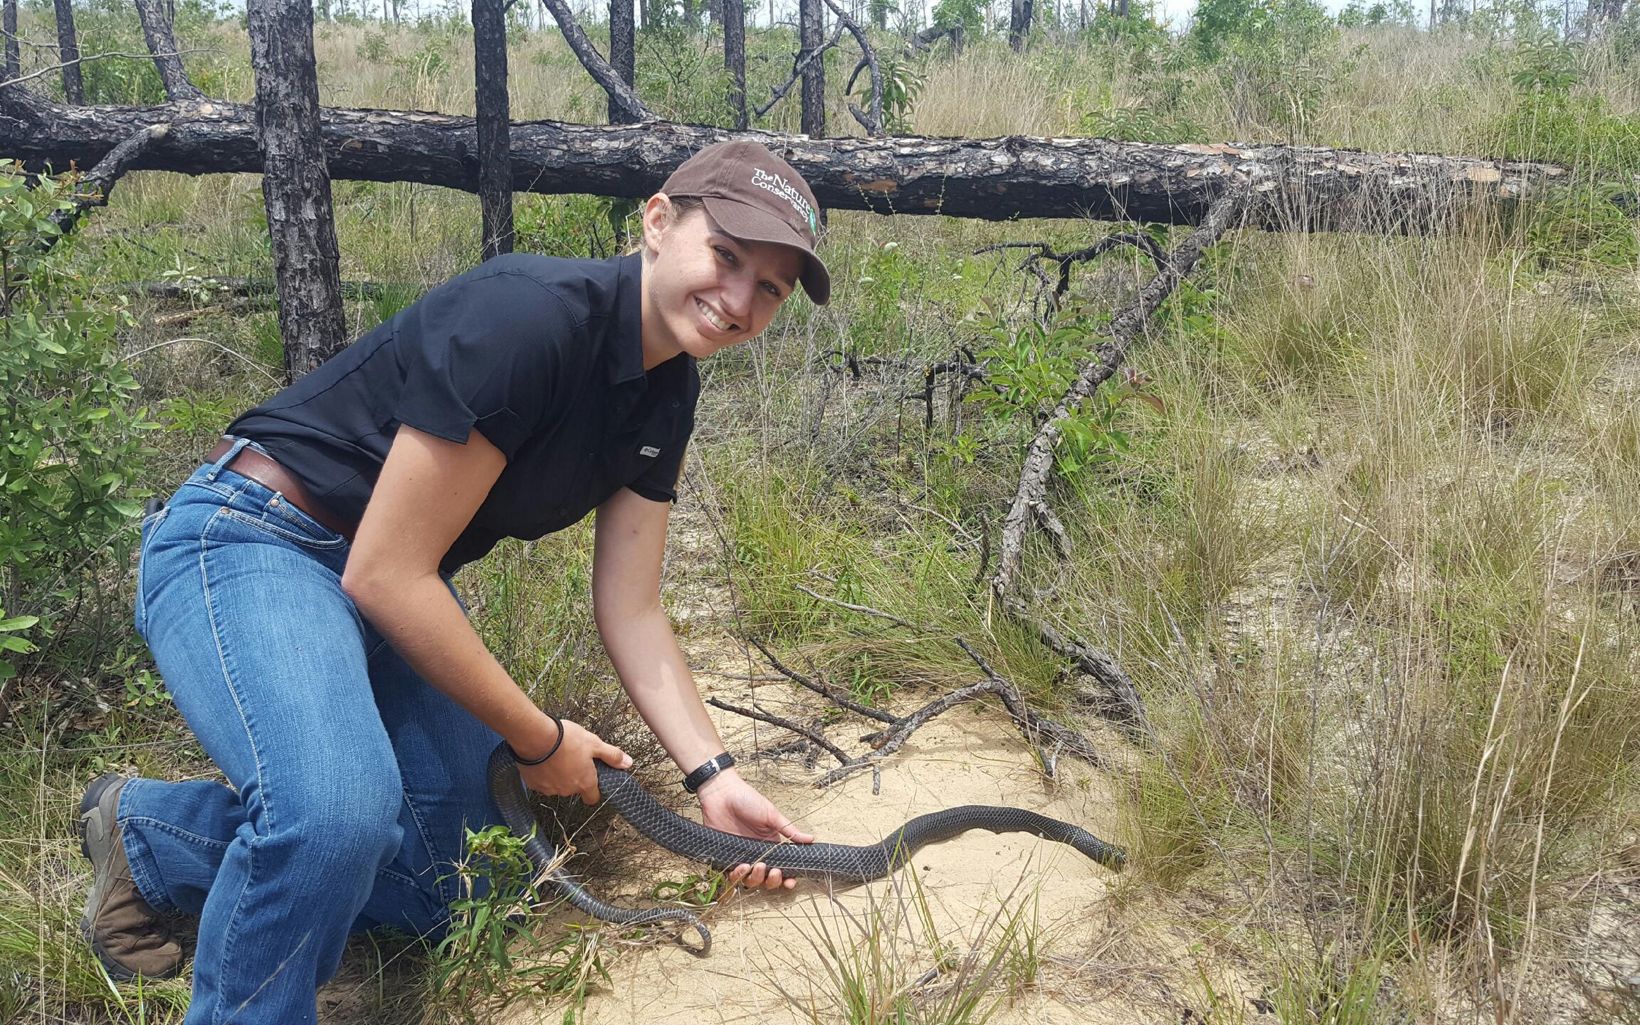 Indigo Snake Release Staff member releases an Eastern indigo snake into a gopher tortoise burrow at Apalachicola Bluffs and Ravines Preserve, as part of a ten-year species reintroduction program. © Tim Donovan